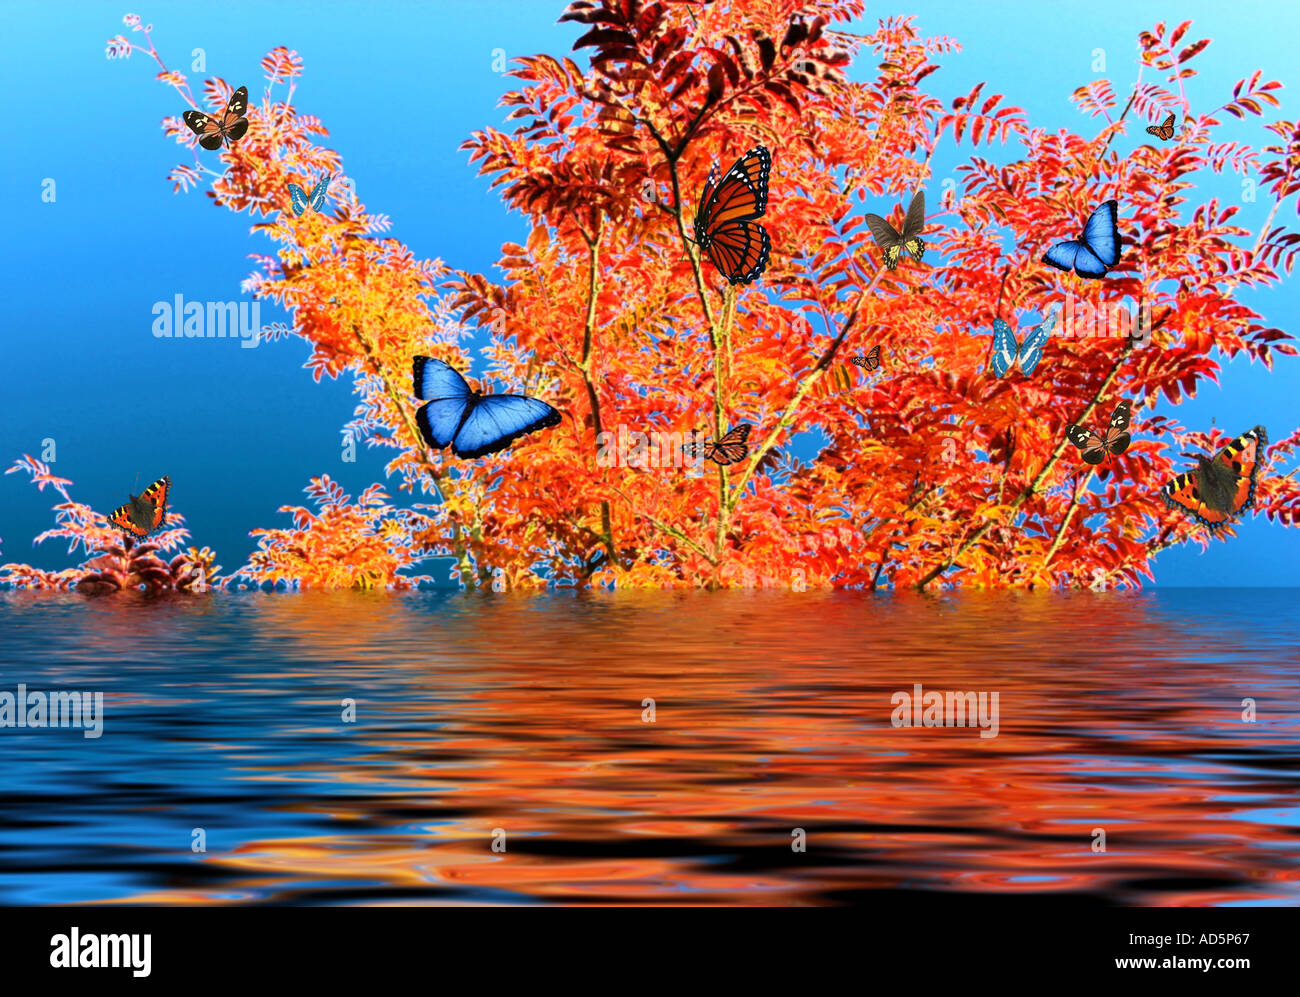 Digital Art of Butterflies in Flood on Autumn Branches Stock Photo